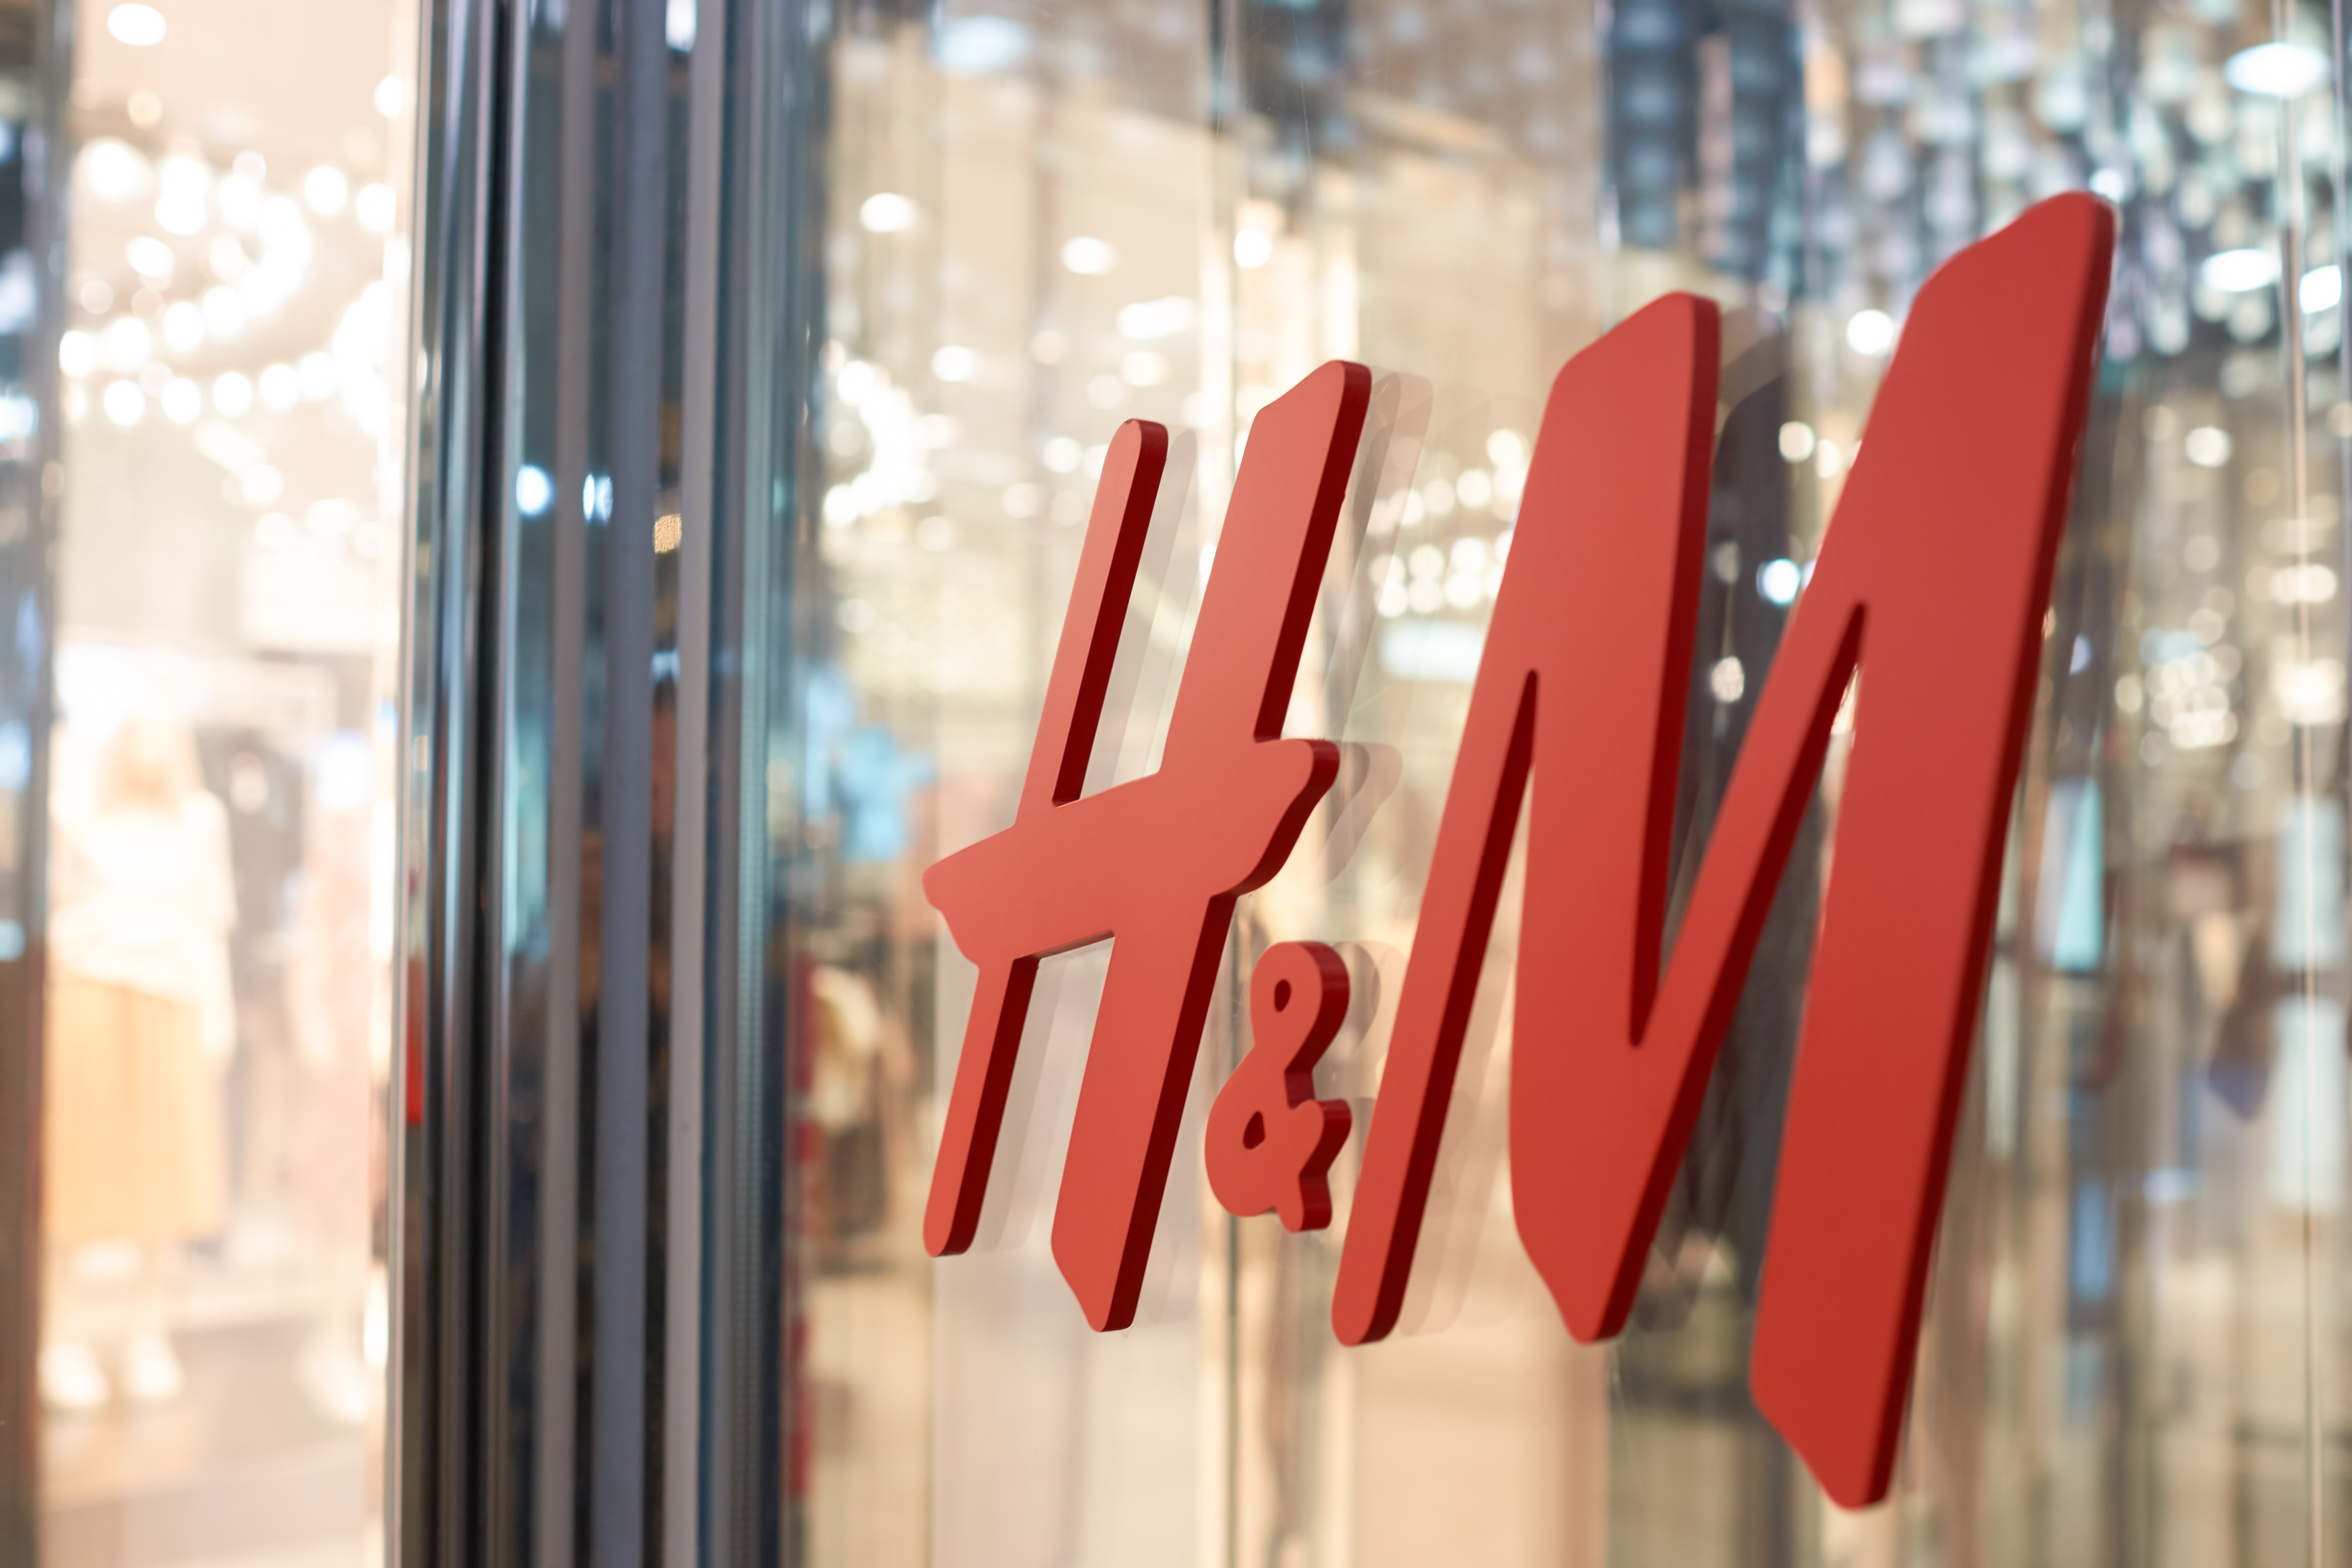 H&M Back On Alibaba's Tmall Months After Controversy Over Uyghur Comments Forced It To Shut Store